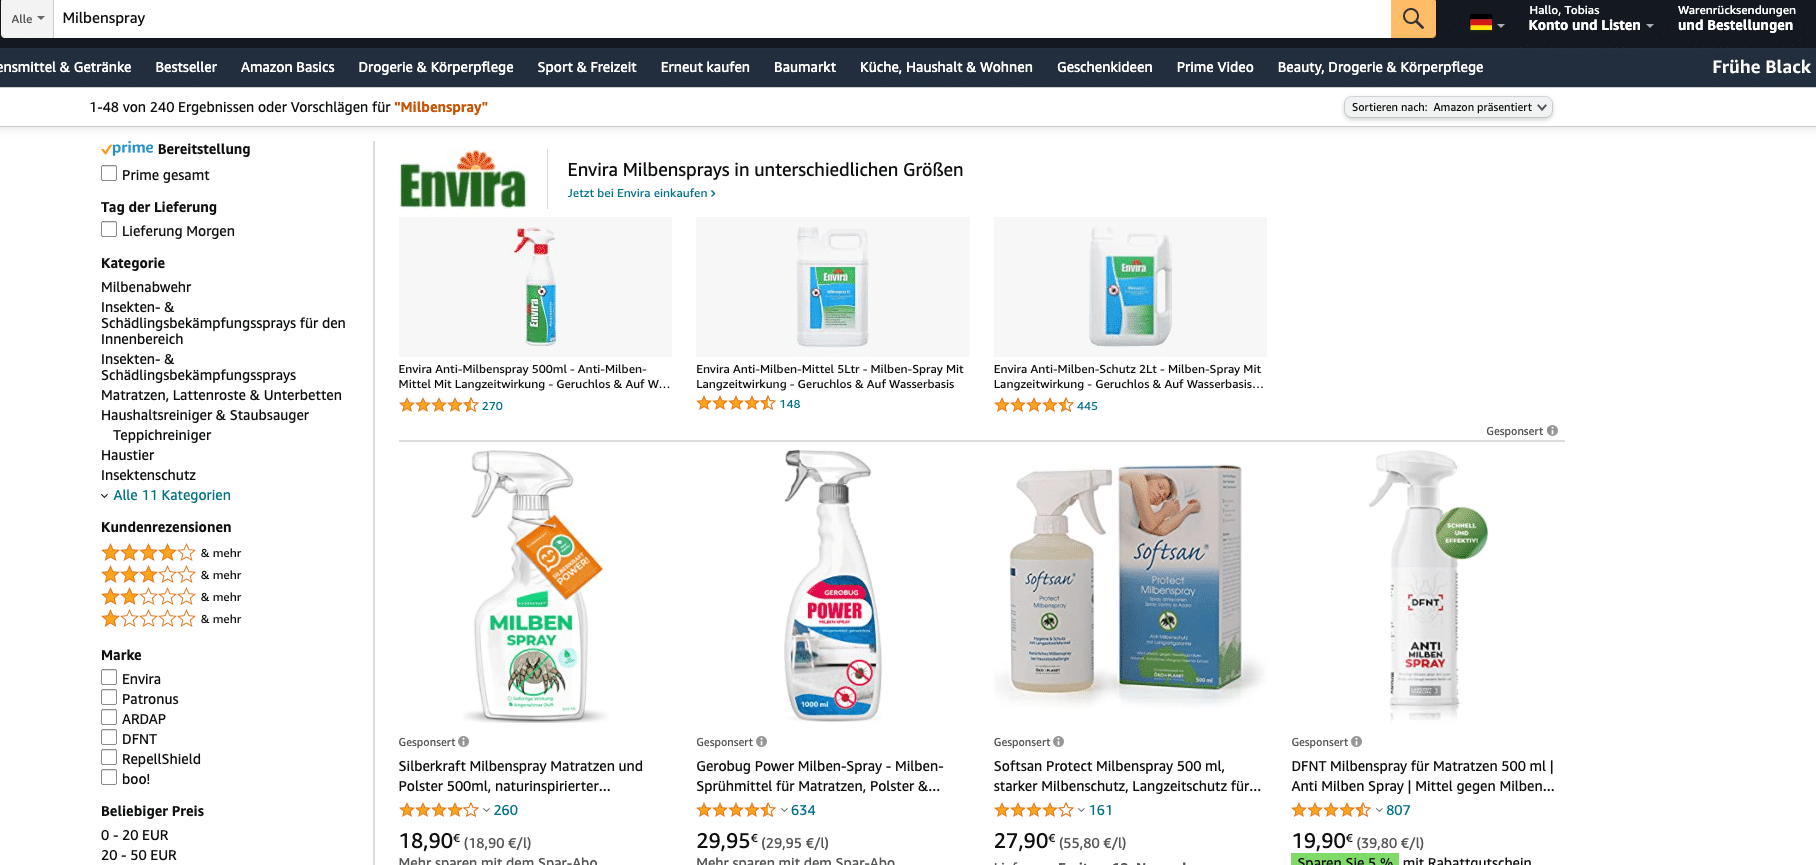 Amazon sposnored Product